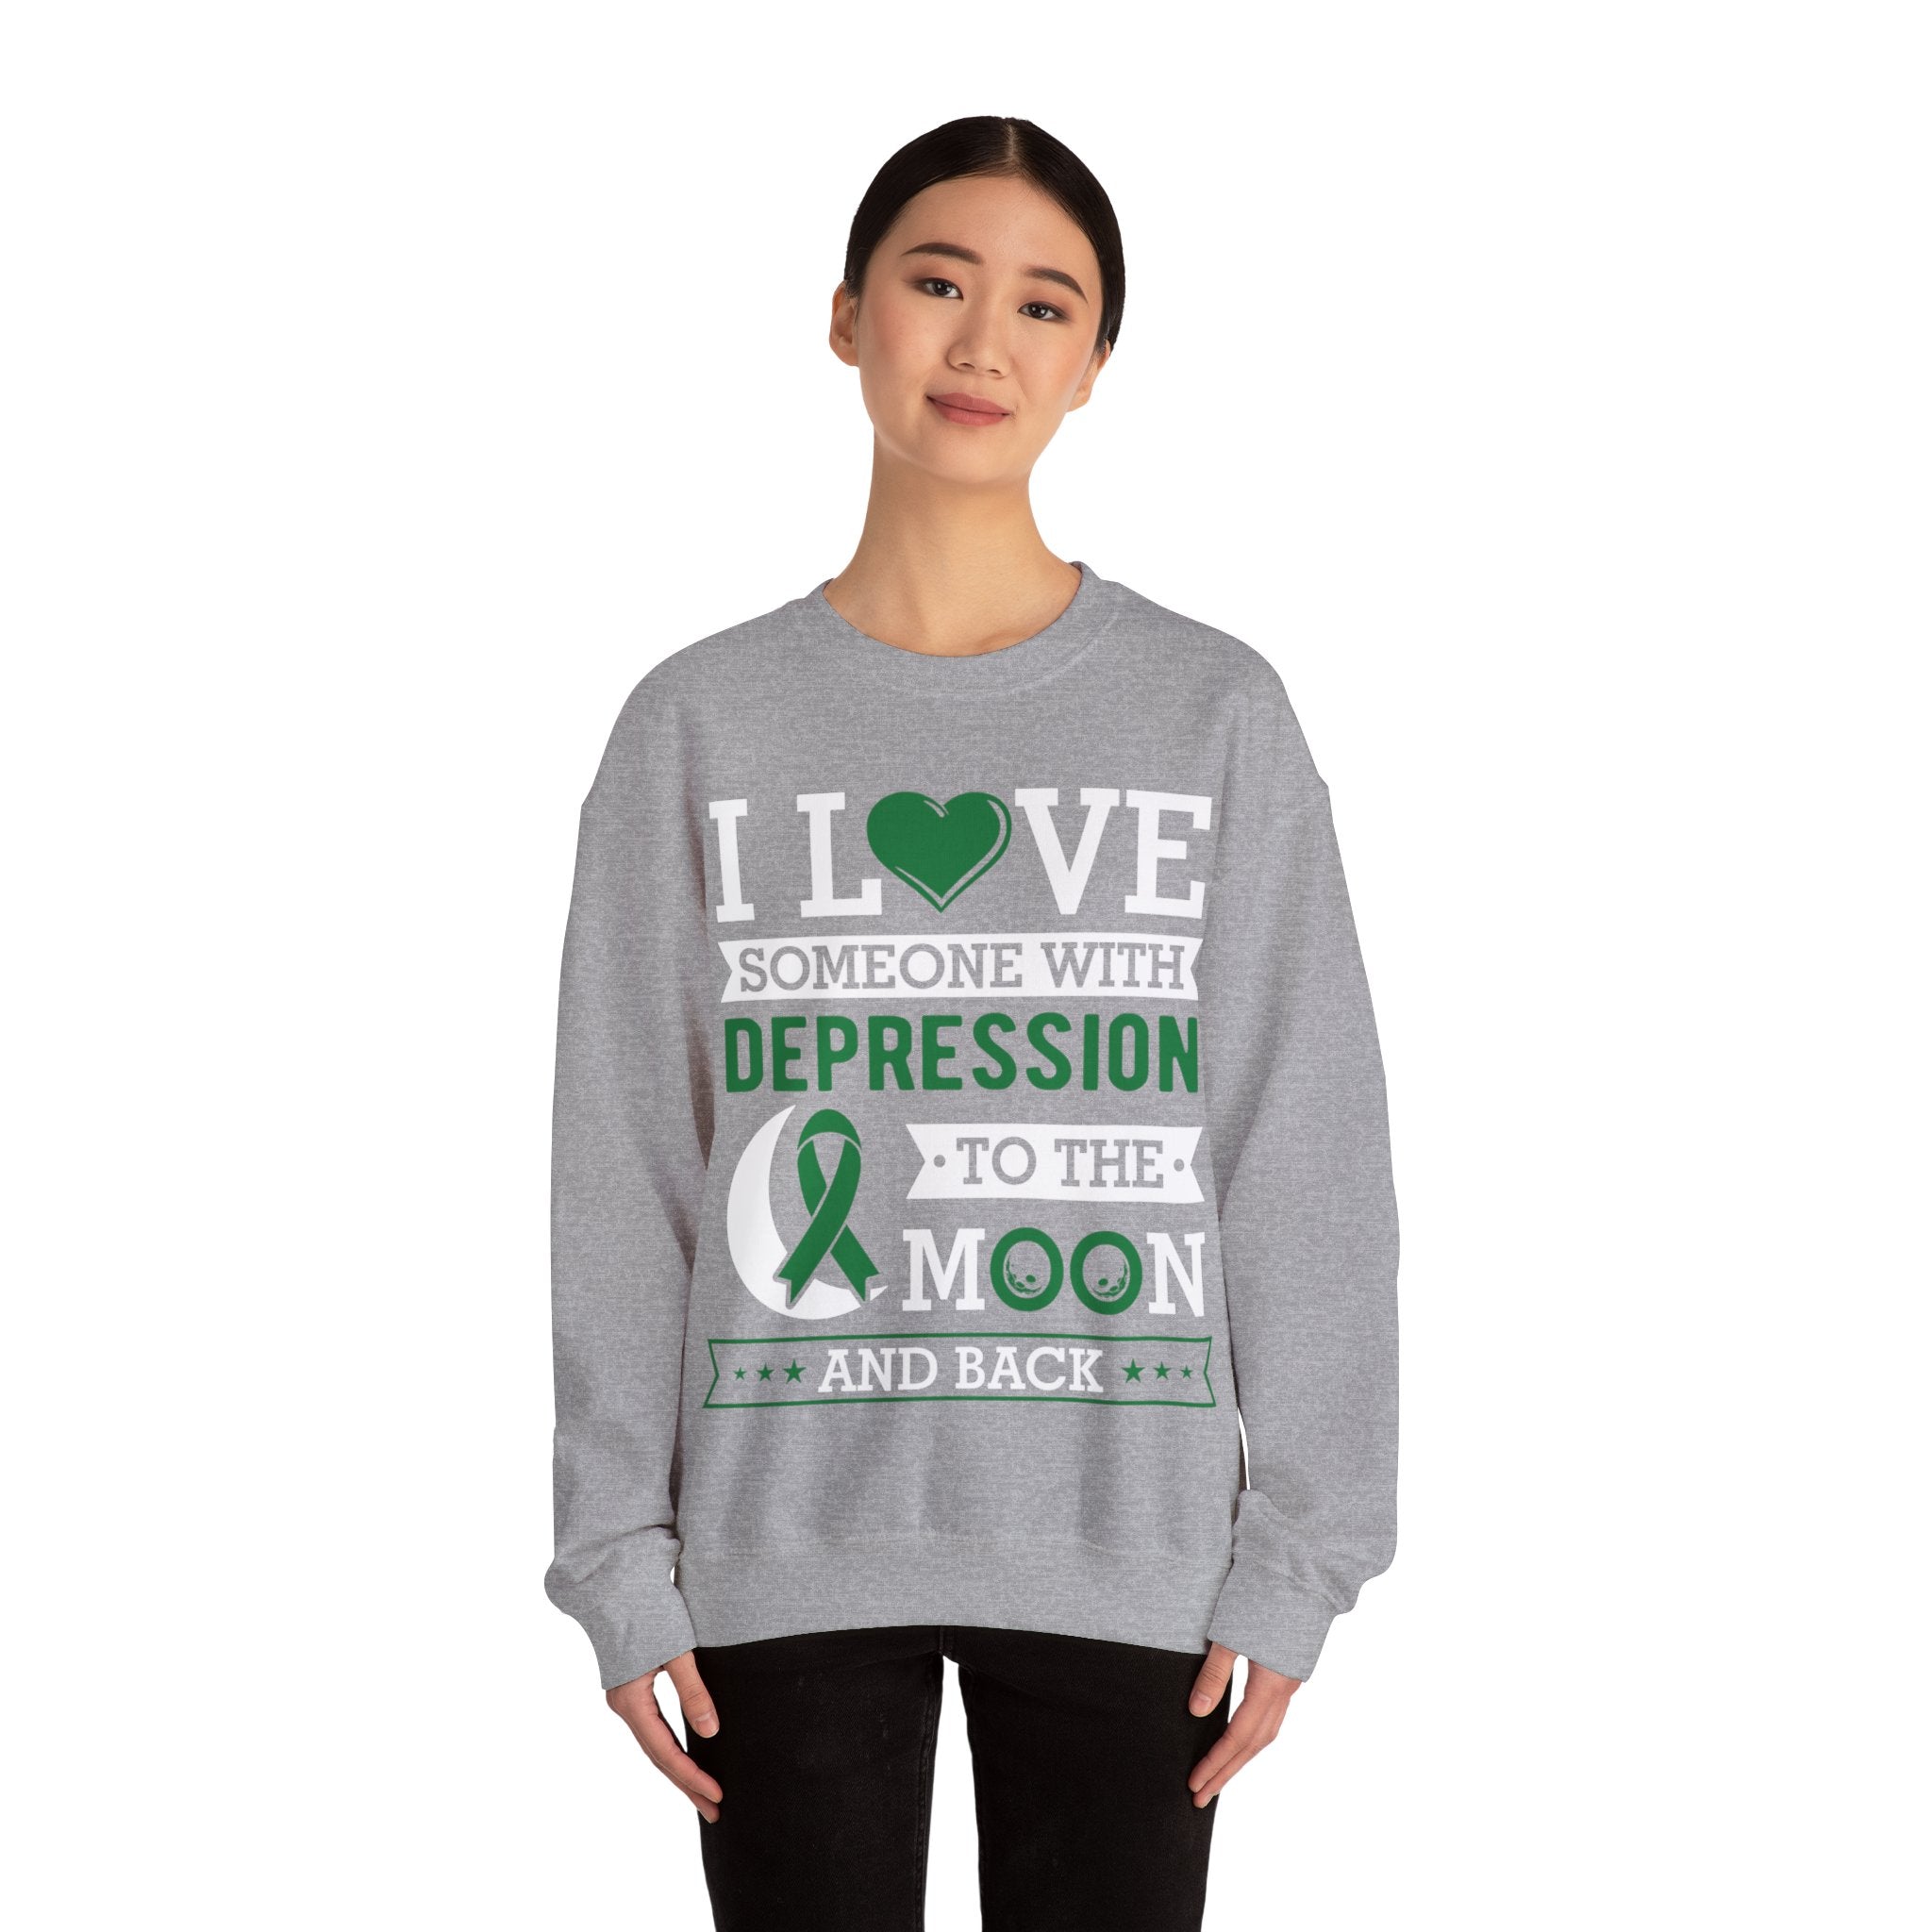 Woman Wearing Shirt/ 💙 A Symbol of Support: Wearing this sweatshirt shows your support for those dealing with depression, helping to break the stigma and opening up conversations about mental health. It's a subtle yet powerful way to show you care and understand.